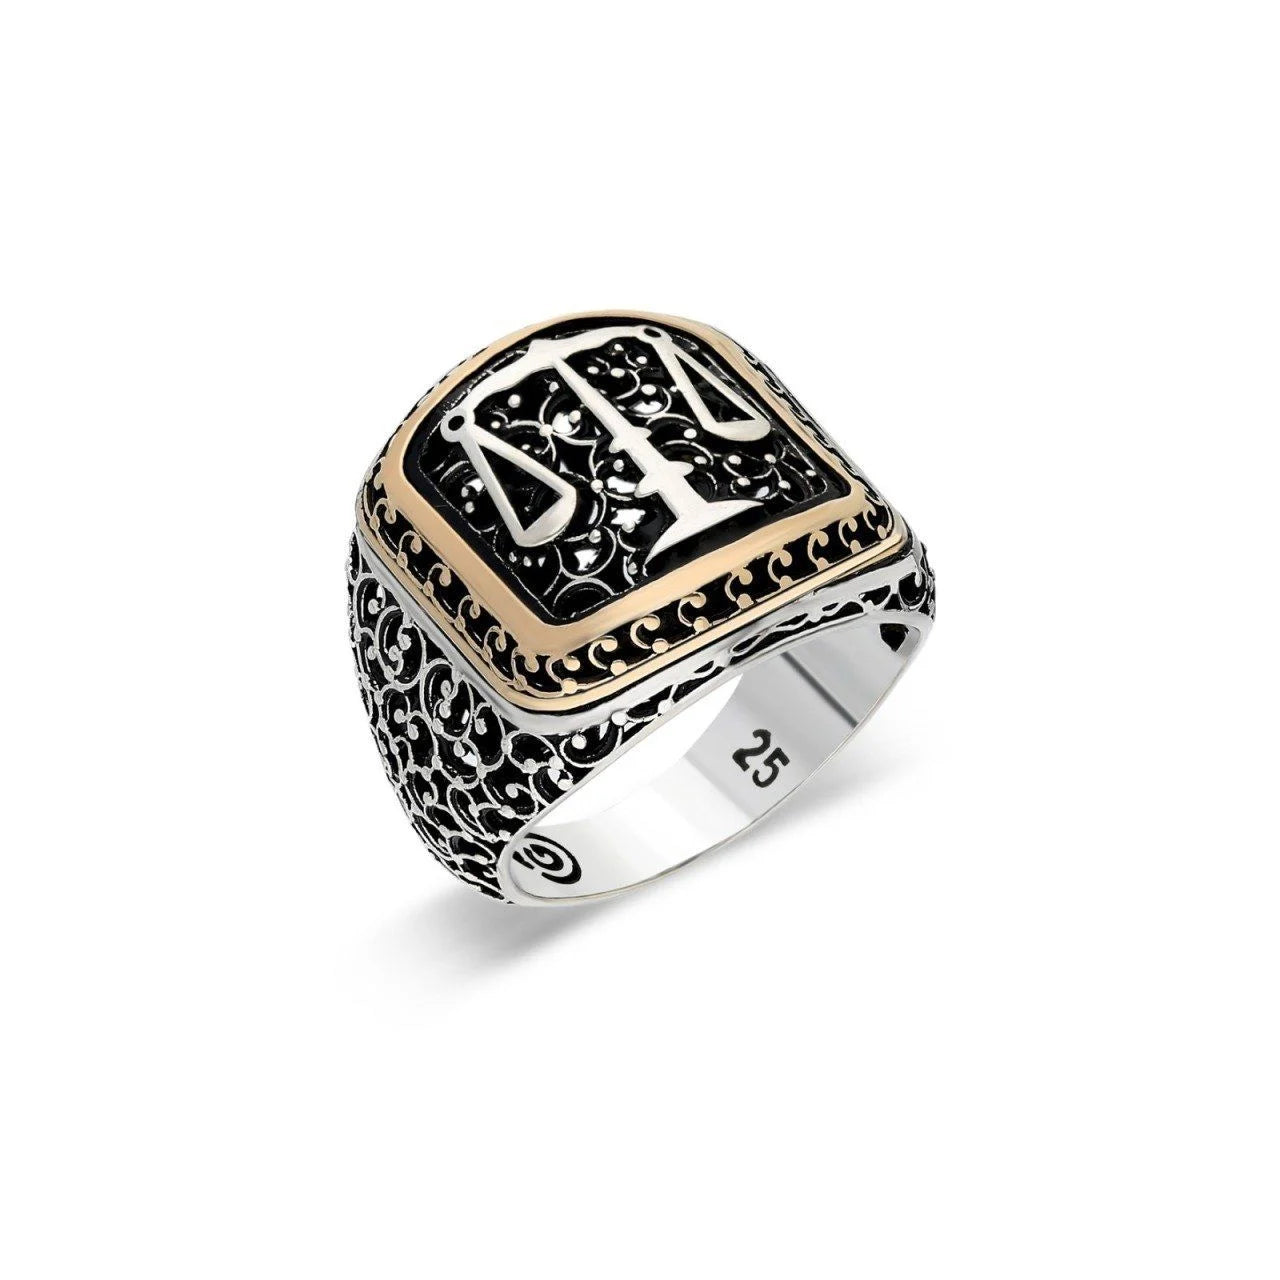 Men's Silver Ring - Bold Scales of with Engraved Sides | OrlaSilver